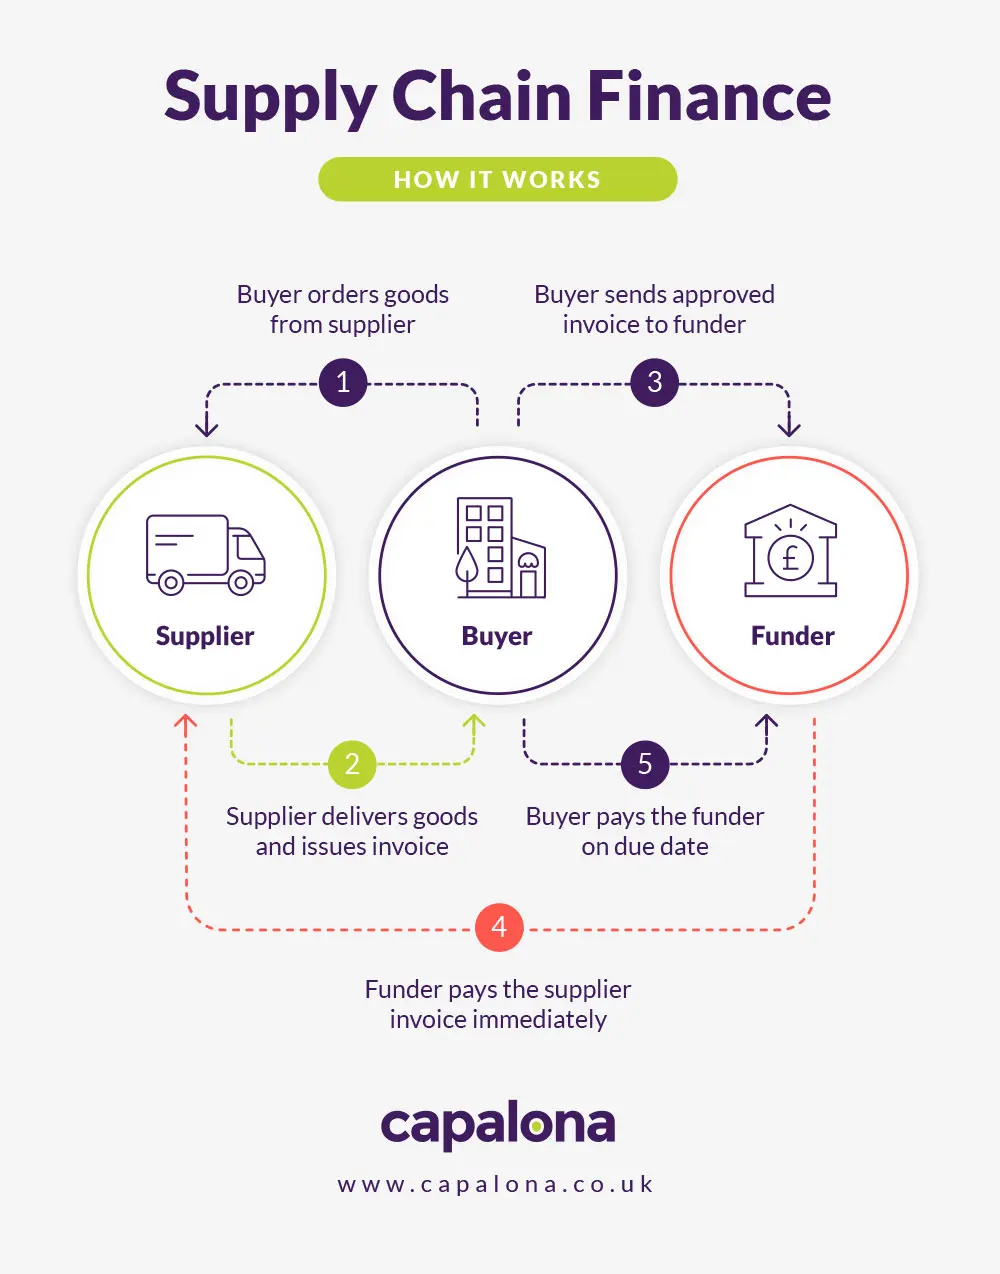 How does supply chain finance work?